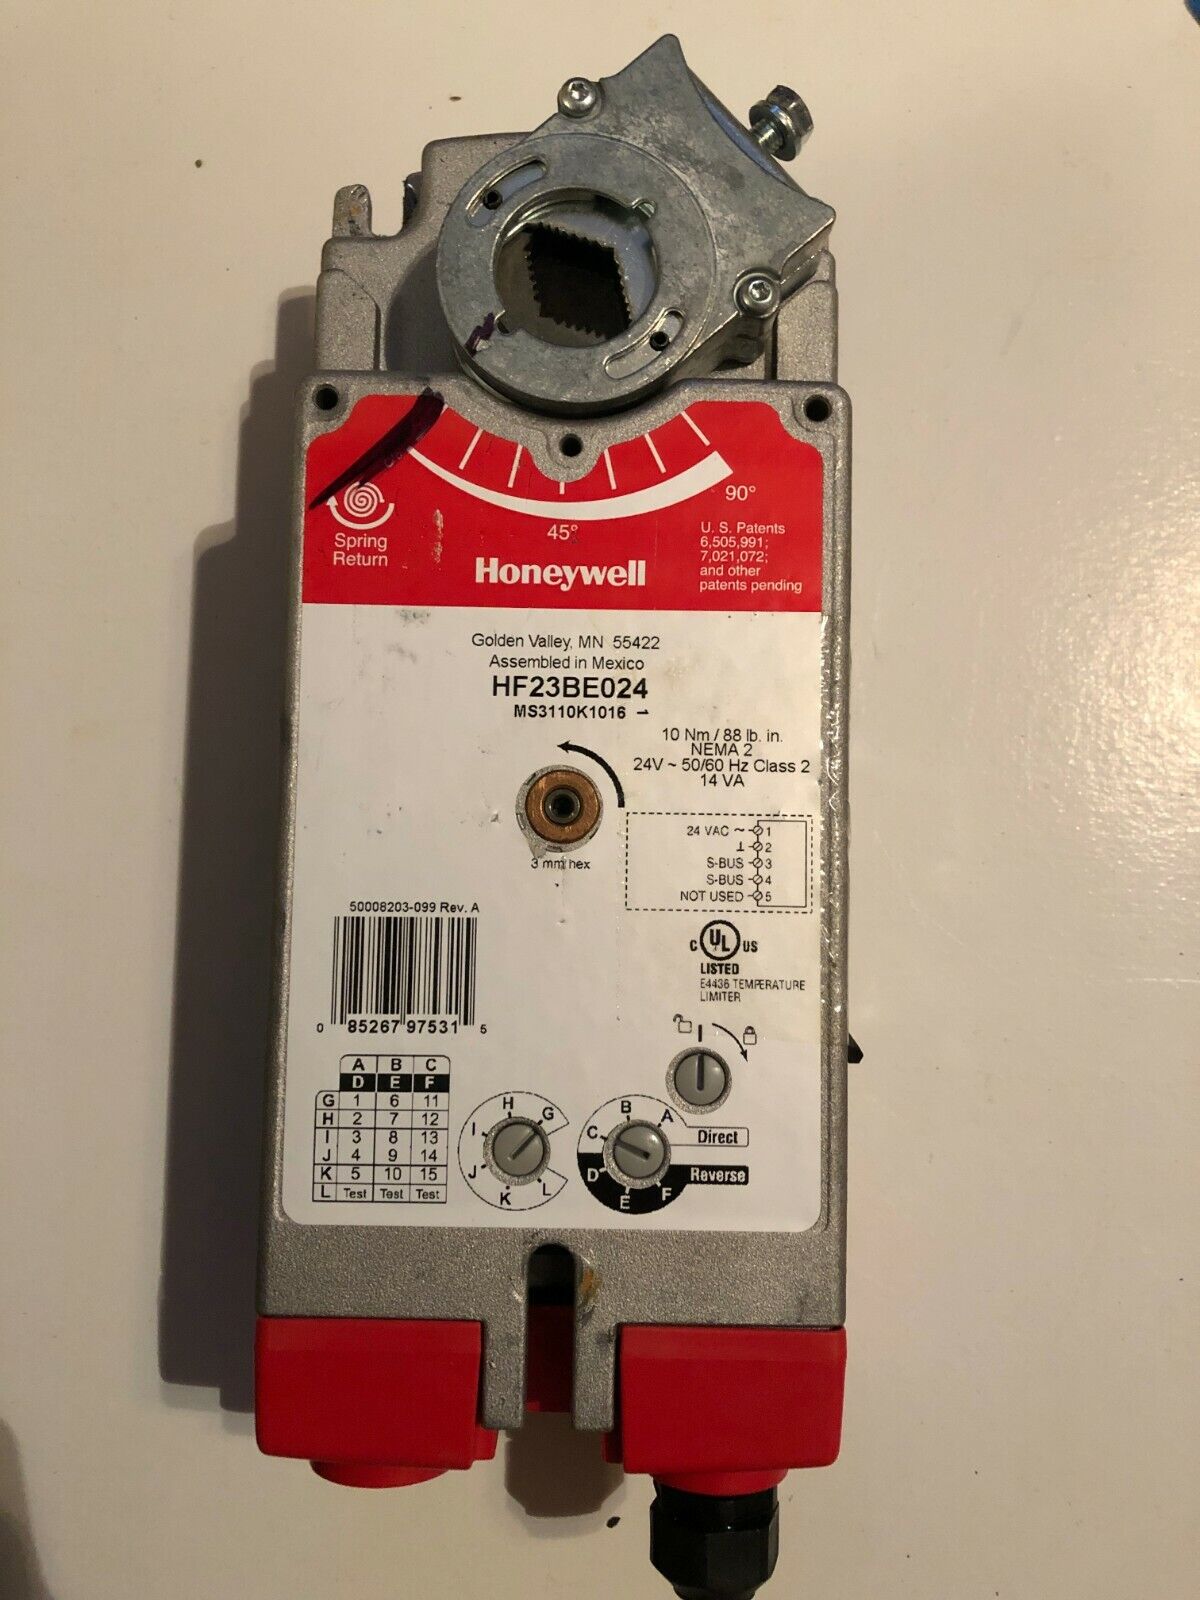 Honeywell HF23BE024   MS3110K1016  Actuator    Removed from new Carrier unit.